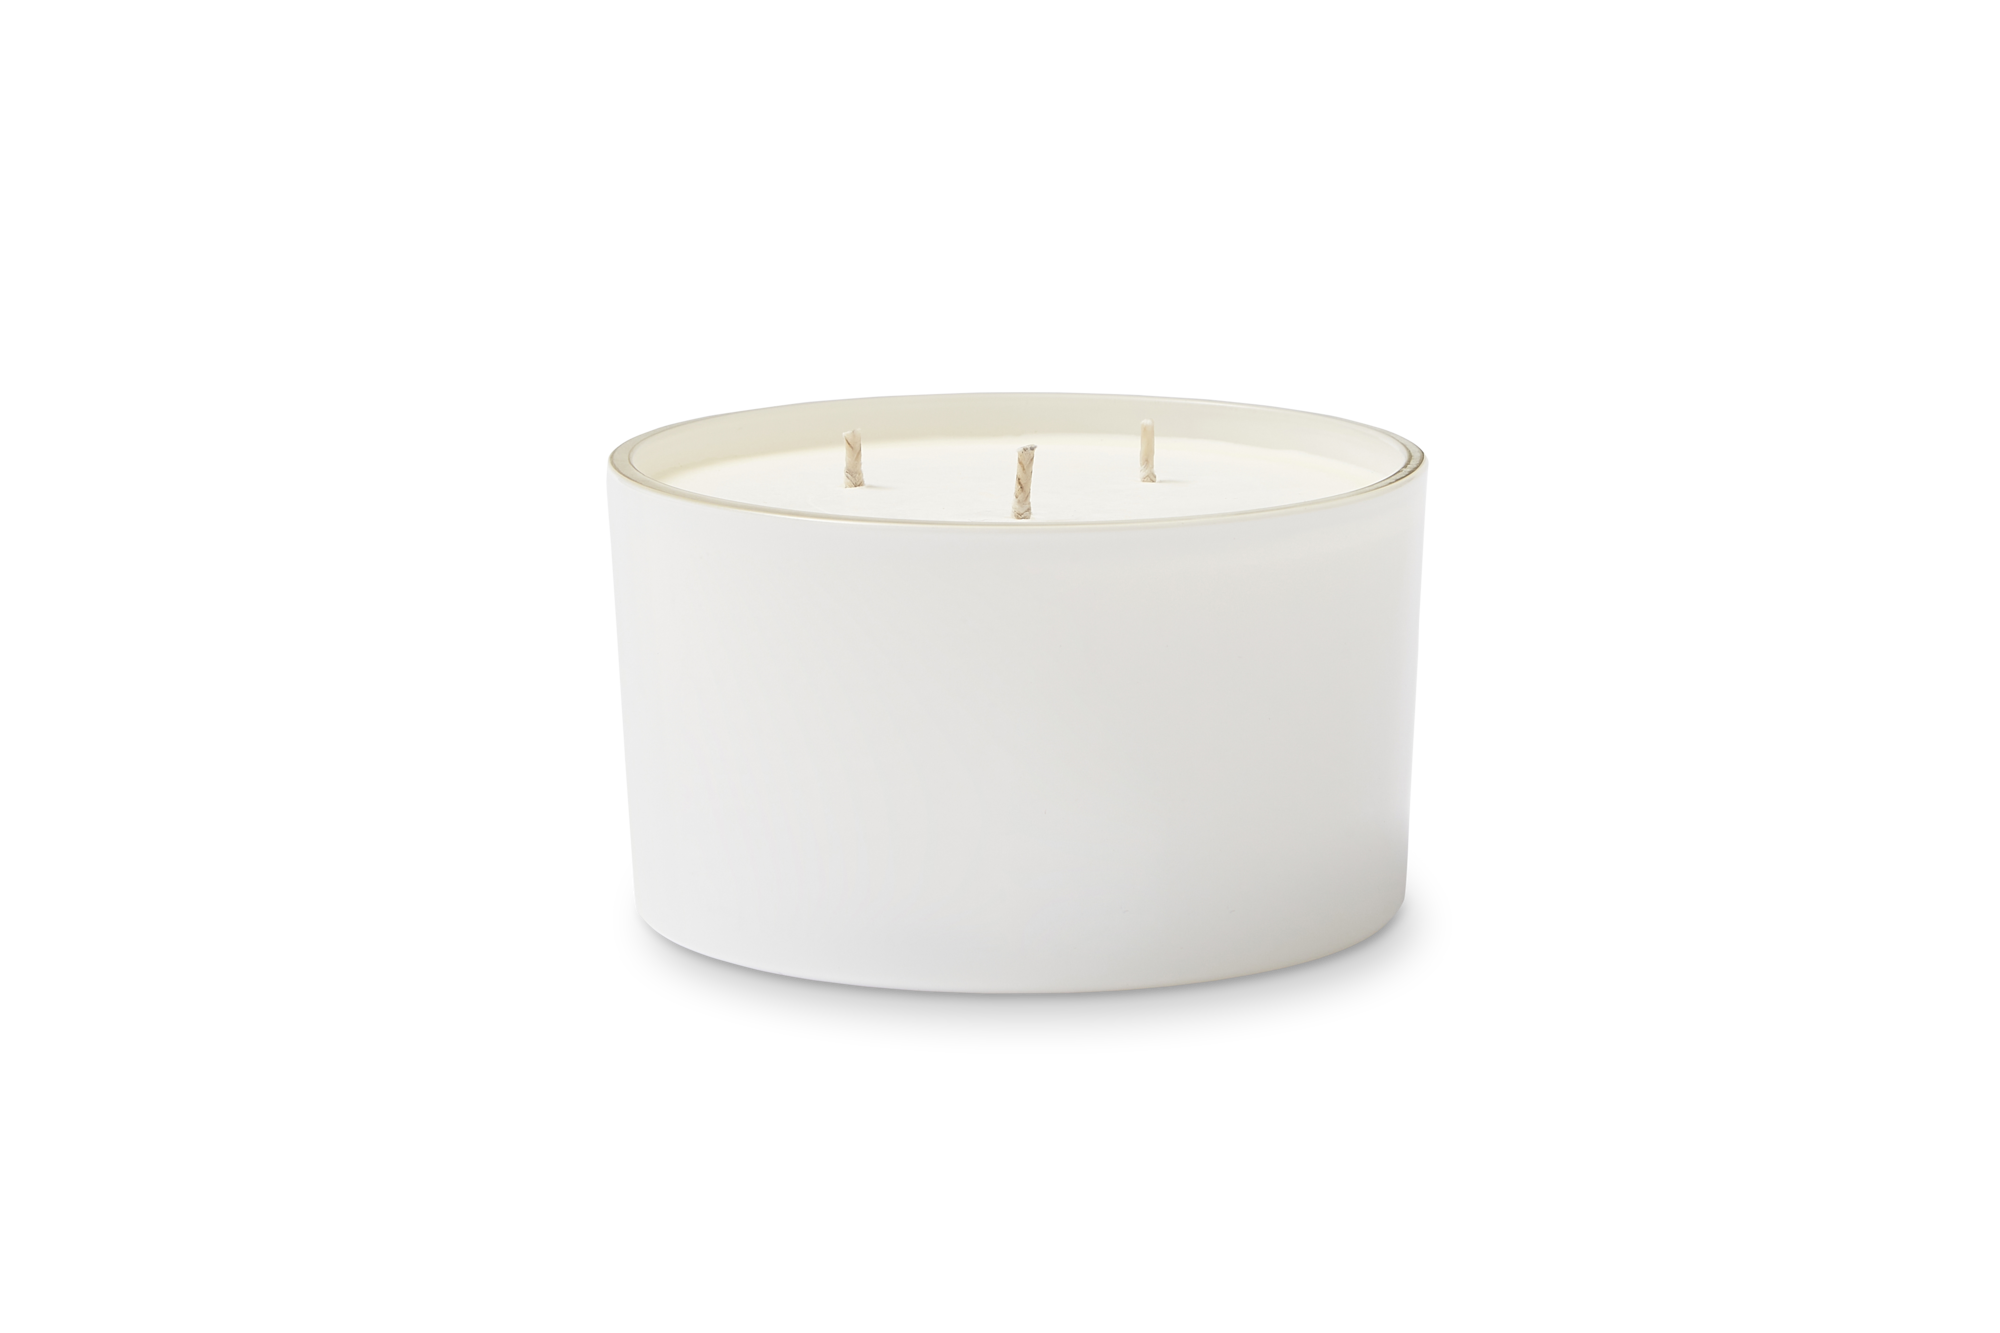 Branded Scented Candle with Eco-soy Wax